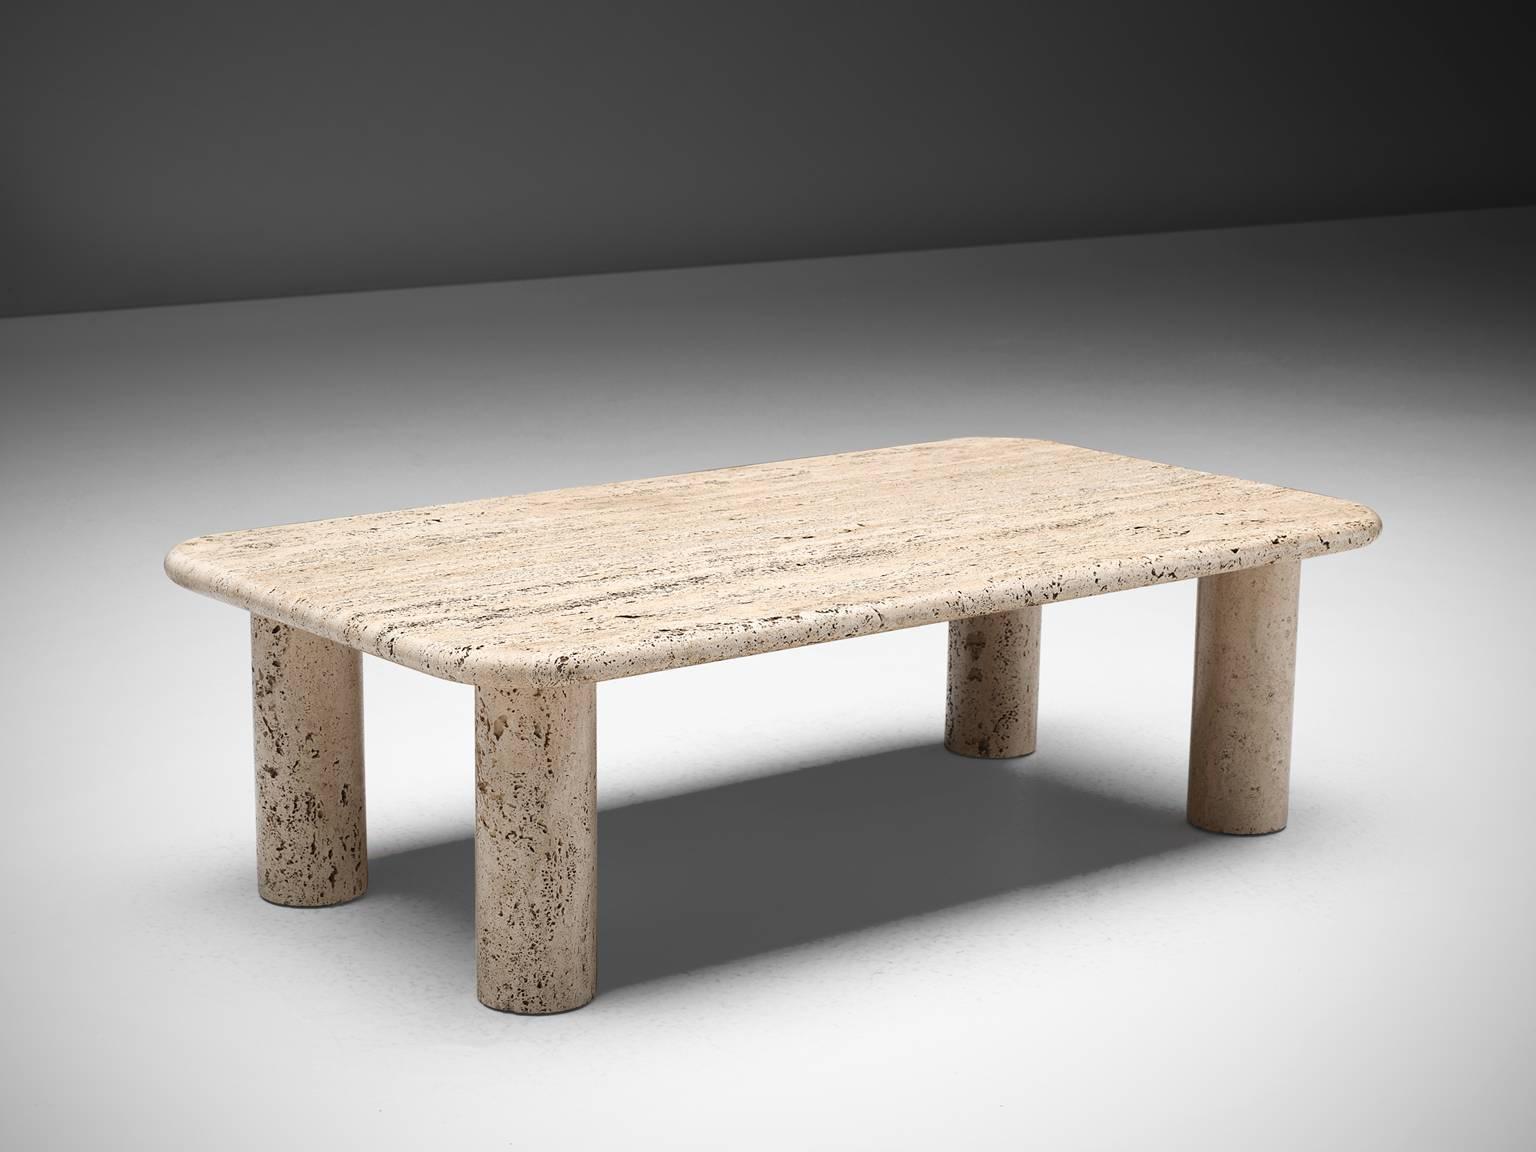 Side table, travertine, Italy, 1970s.

This sculptural is a typical example of postmodern design. The cocktail table is executed in travertine by means of which a warm, natural yet monumental look is created. The thick, soft-edged rectangular top